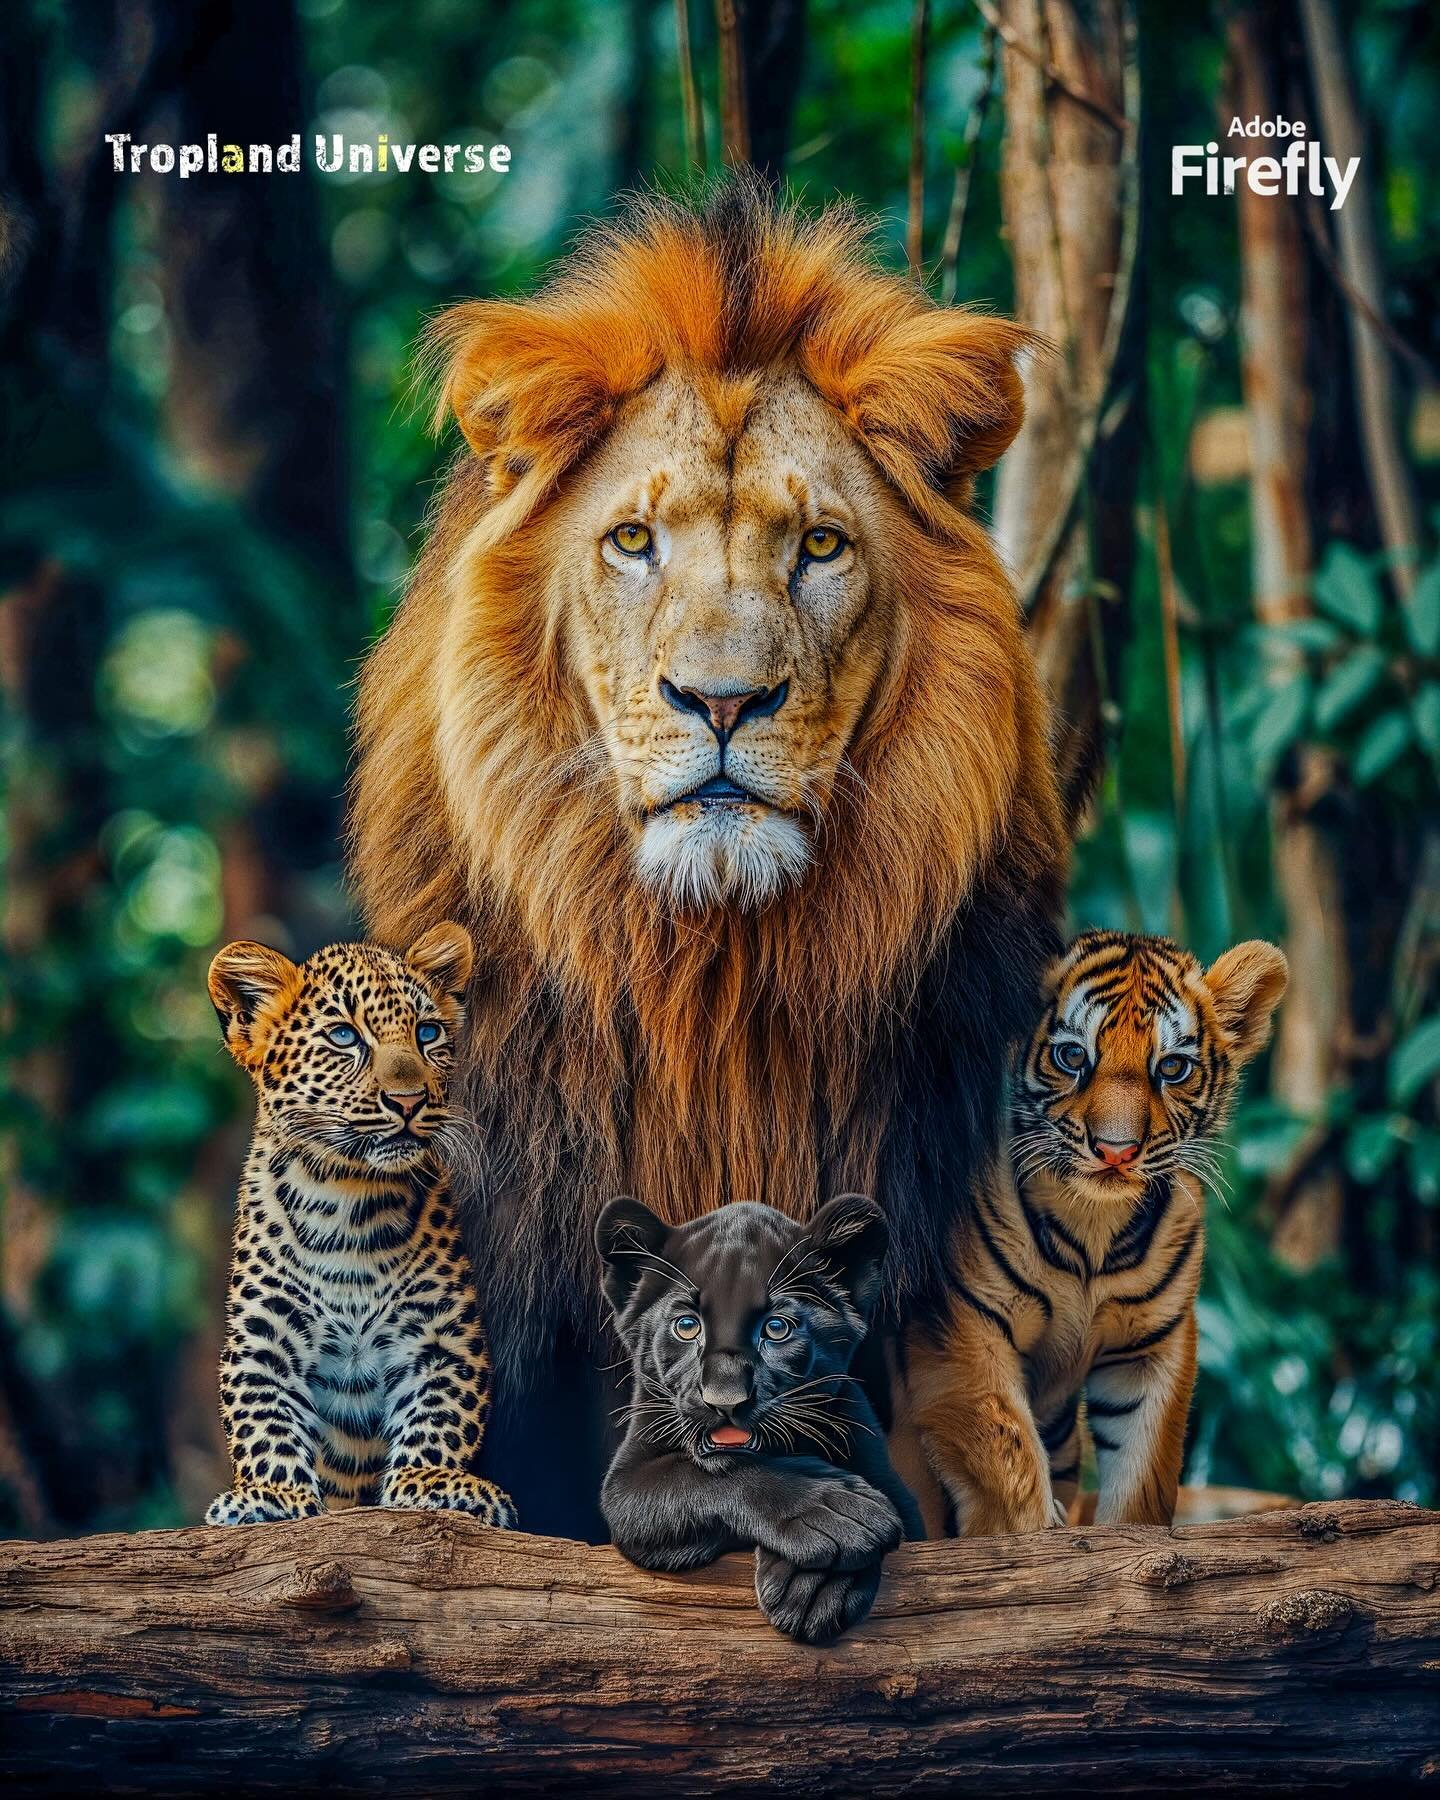 Family is everything, and we accept everyone for who they are.&nbsp;🦁❤️

Using the new Generative Fill AI in Adobe Photoshop, I took on the challenge of replacing lion cubs with a tiger, leopard, and black panther. It was a creative process that too